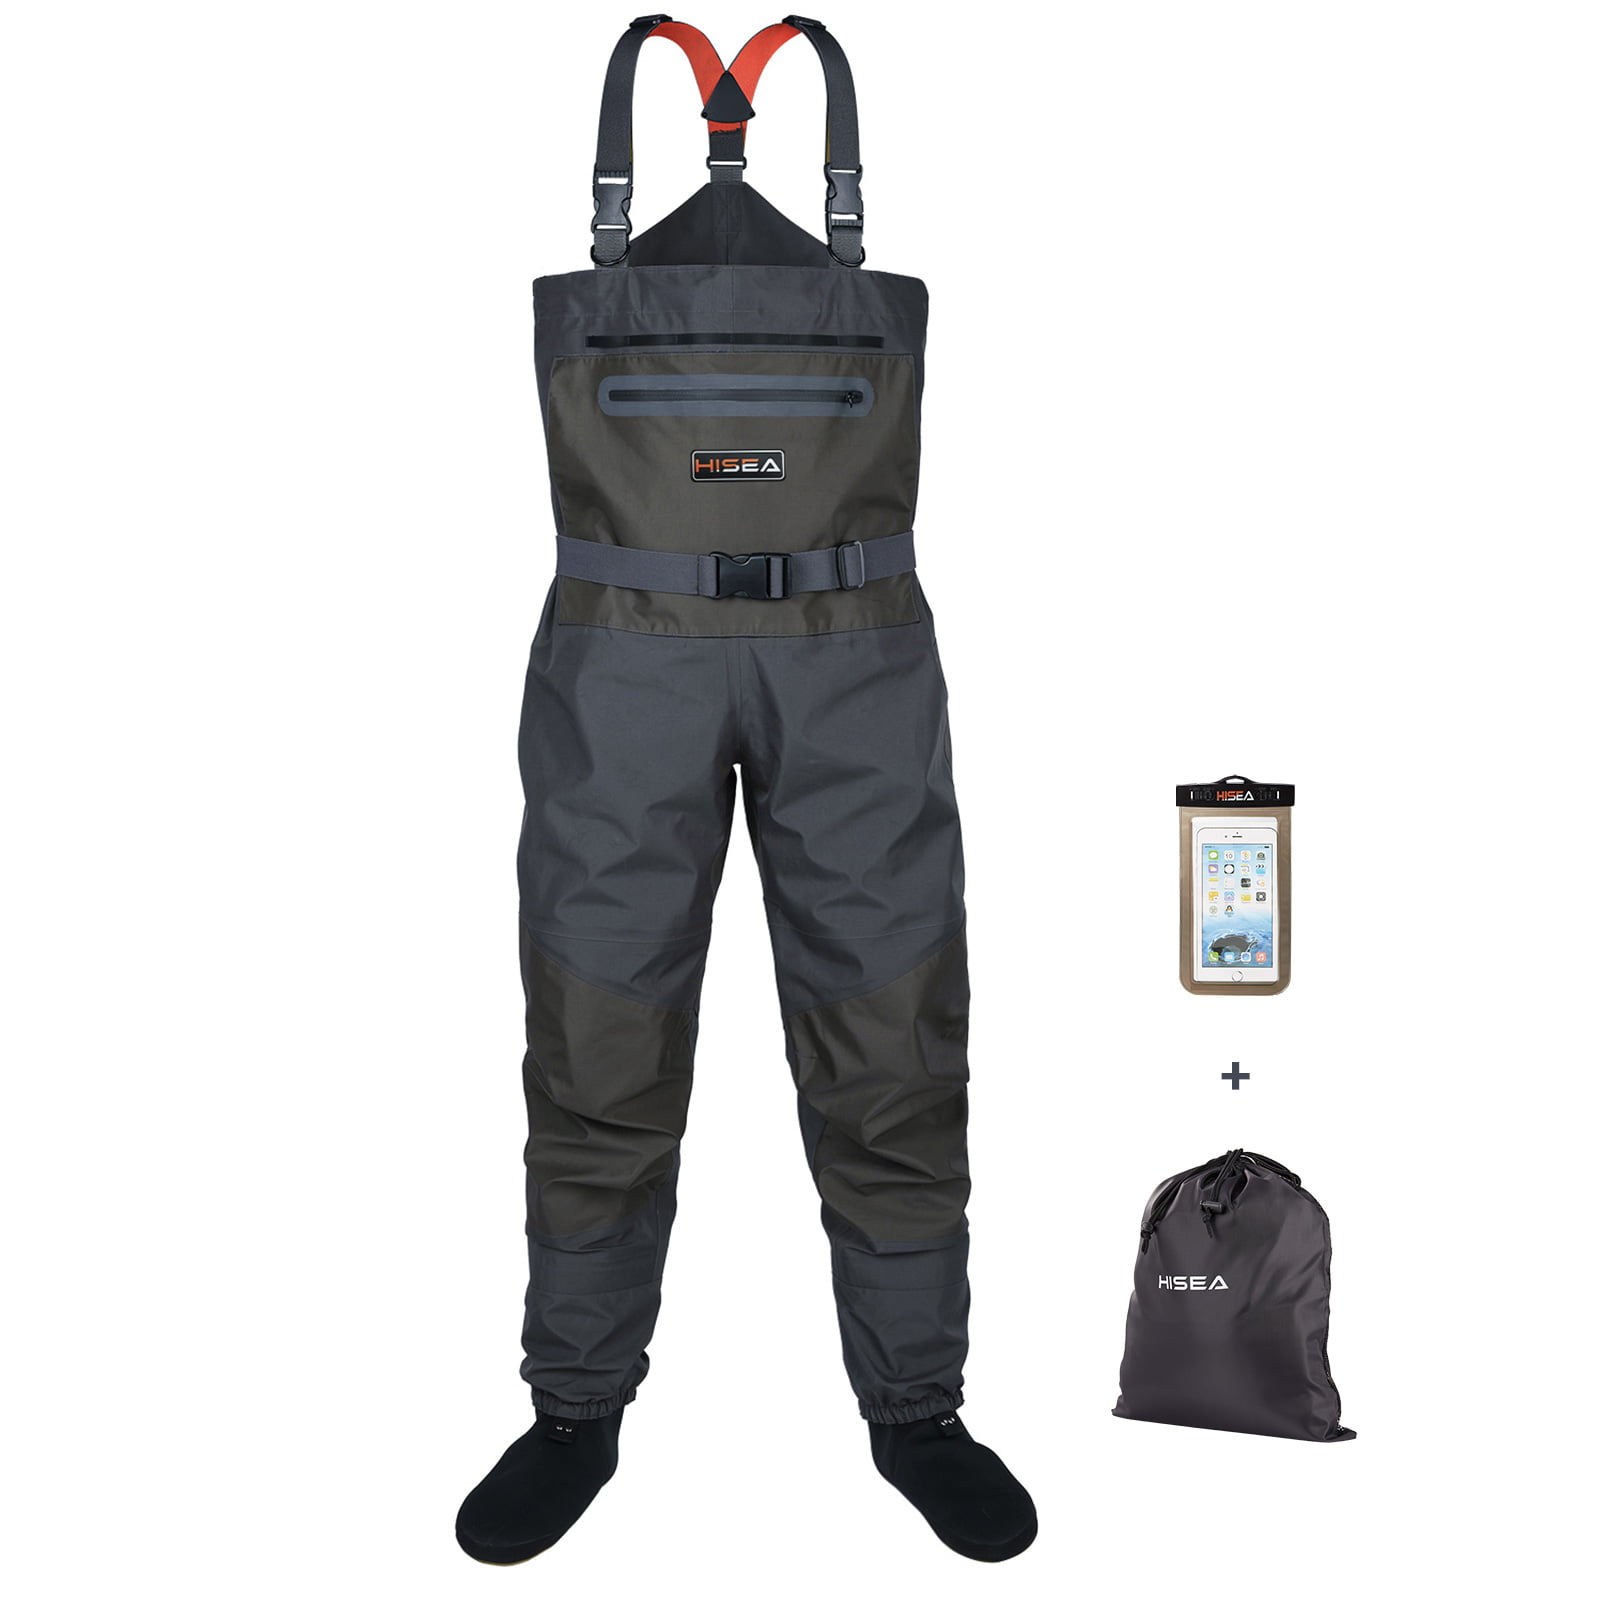 Fly Fishing Stocking Foot Wader Affordable Breathable Waterproof Chest Waders 